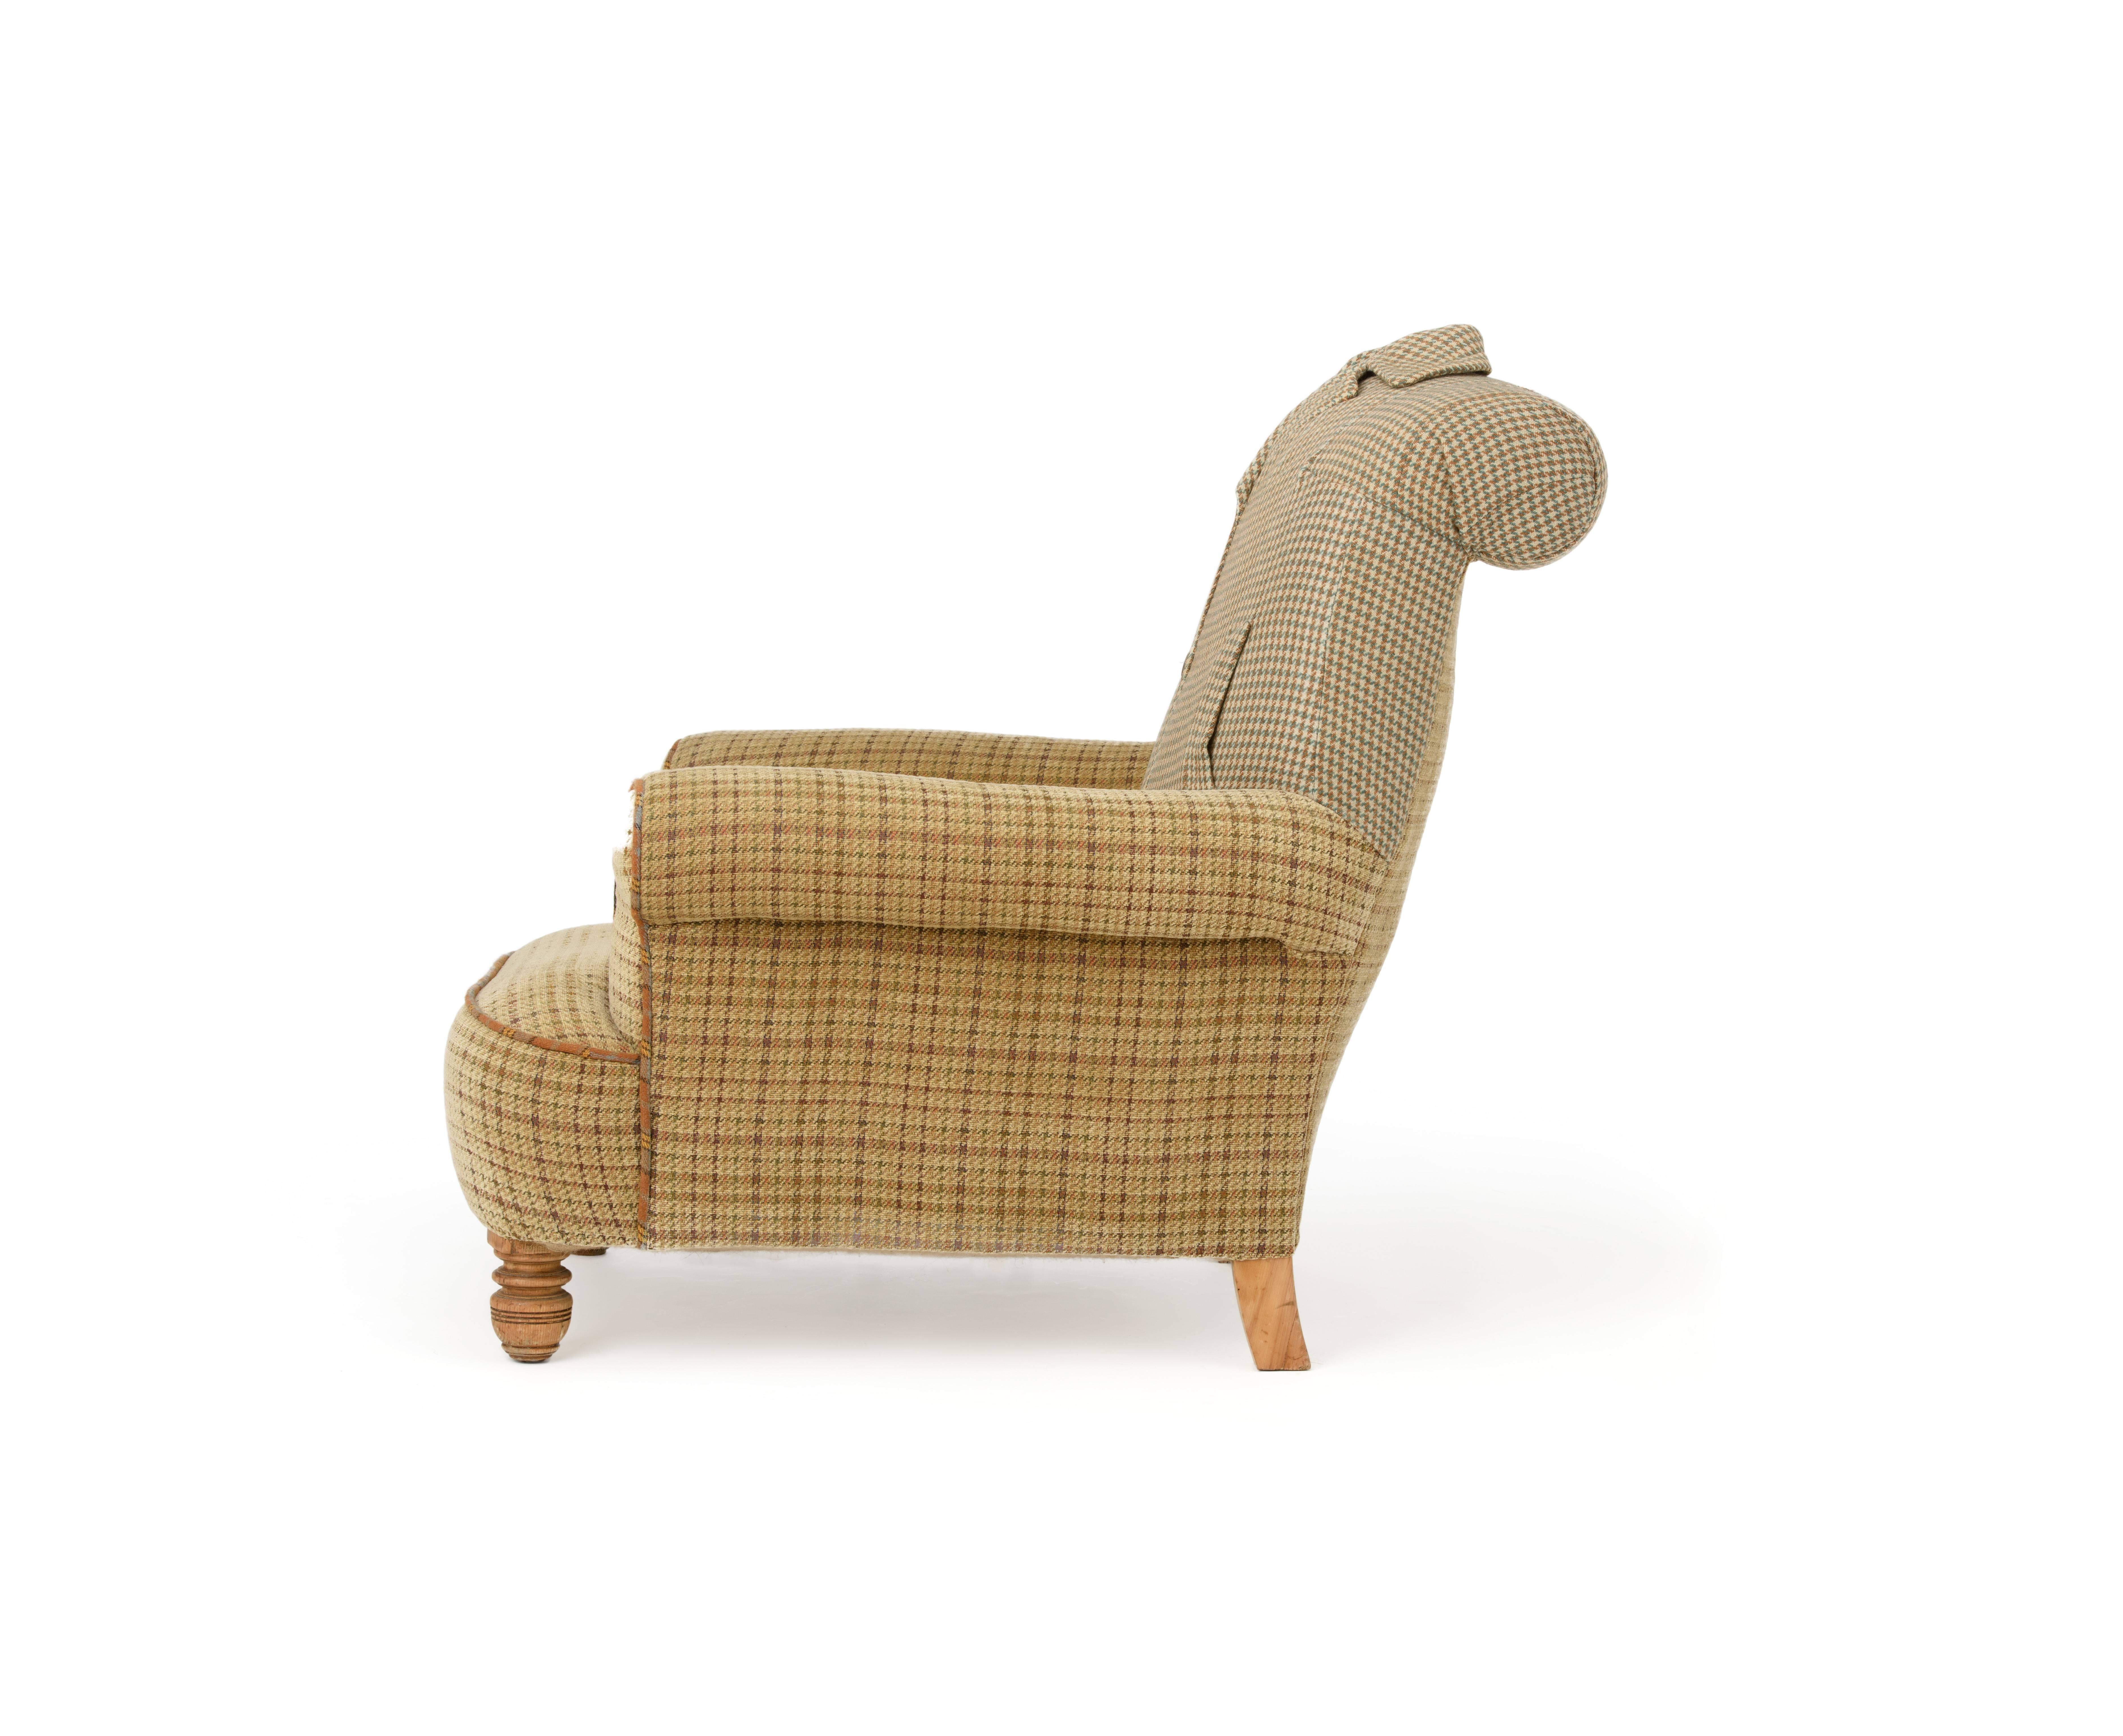 Delightful deep seated Victorian armchair reupholstered in an eclectic mix of original Harris Tweed overcoat and matching tweed, ginger tweed piped detail resting on turned wooden legs.